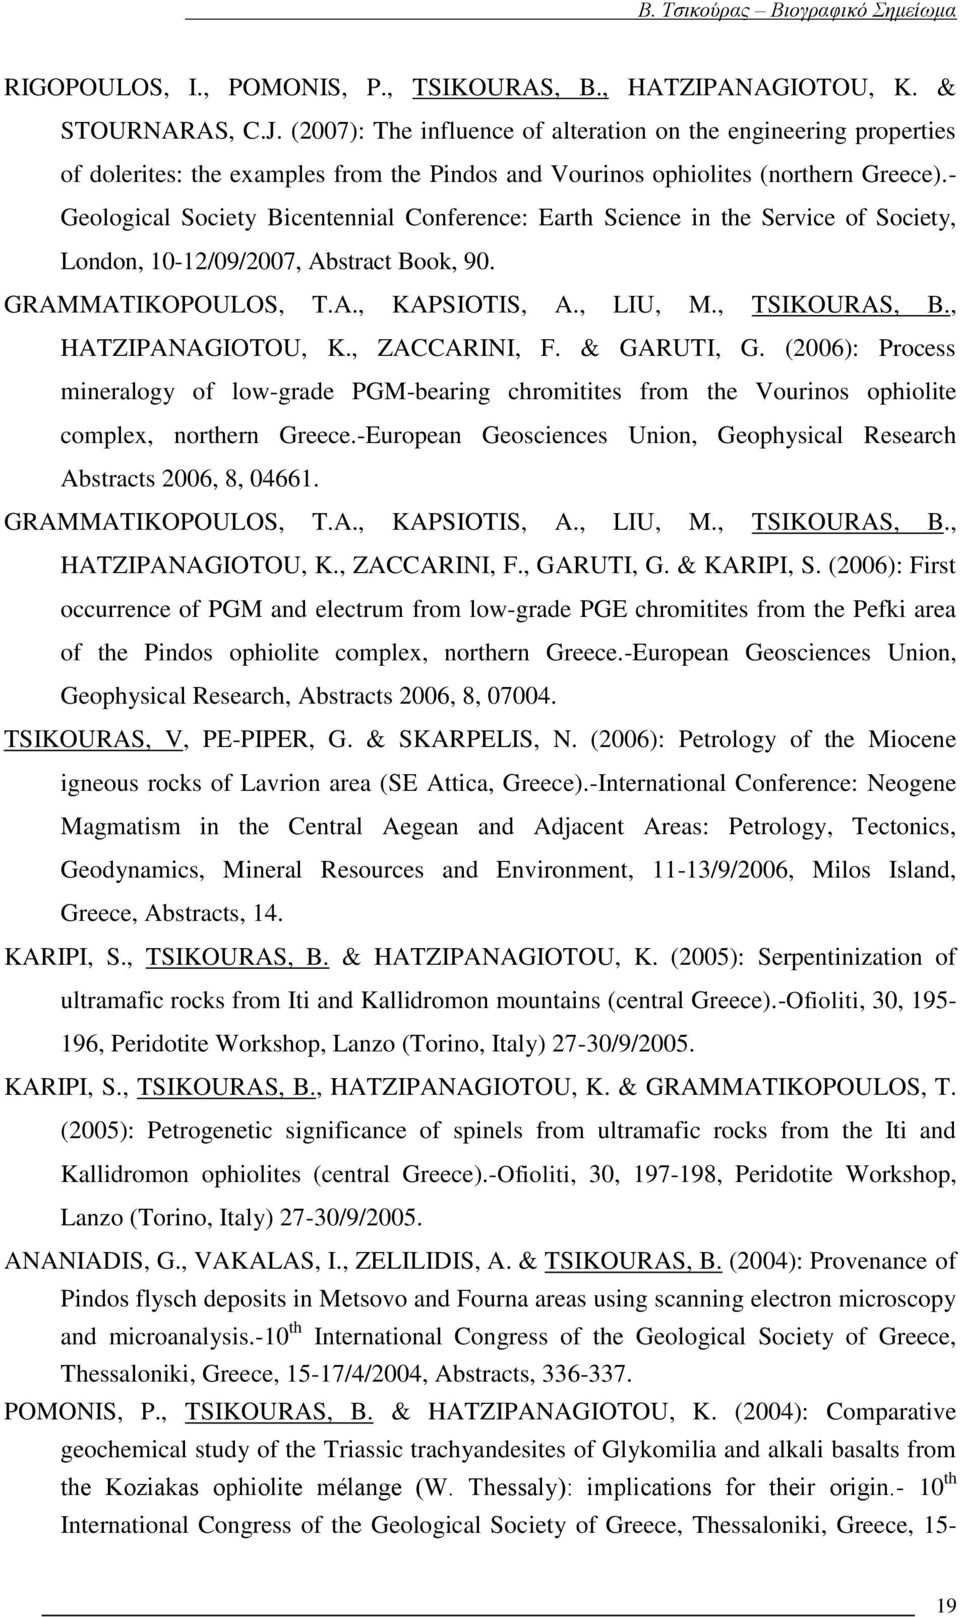 - Geological Society Bicentennial Conference: Earth Science in the Service of Society, London, 10-12/09/2007, Abstract Book, 90. GRAMMATIKOPOULOS, T.A., KAPSIOTIS, A., LIU, M., TSIKOURAS, B.